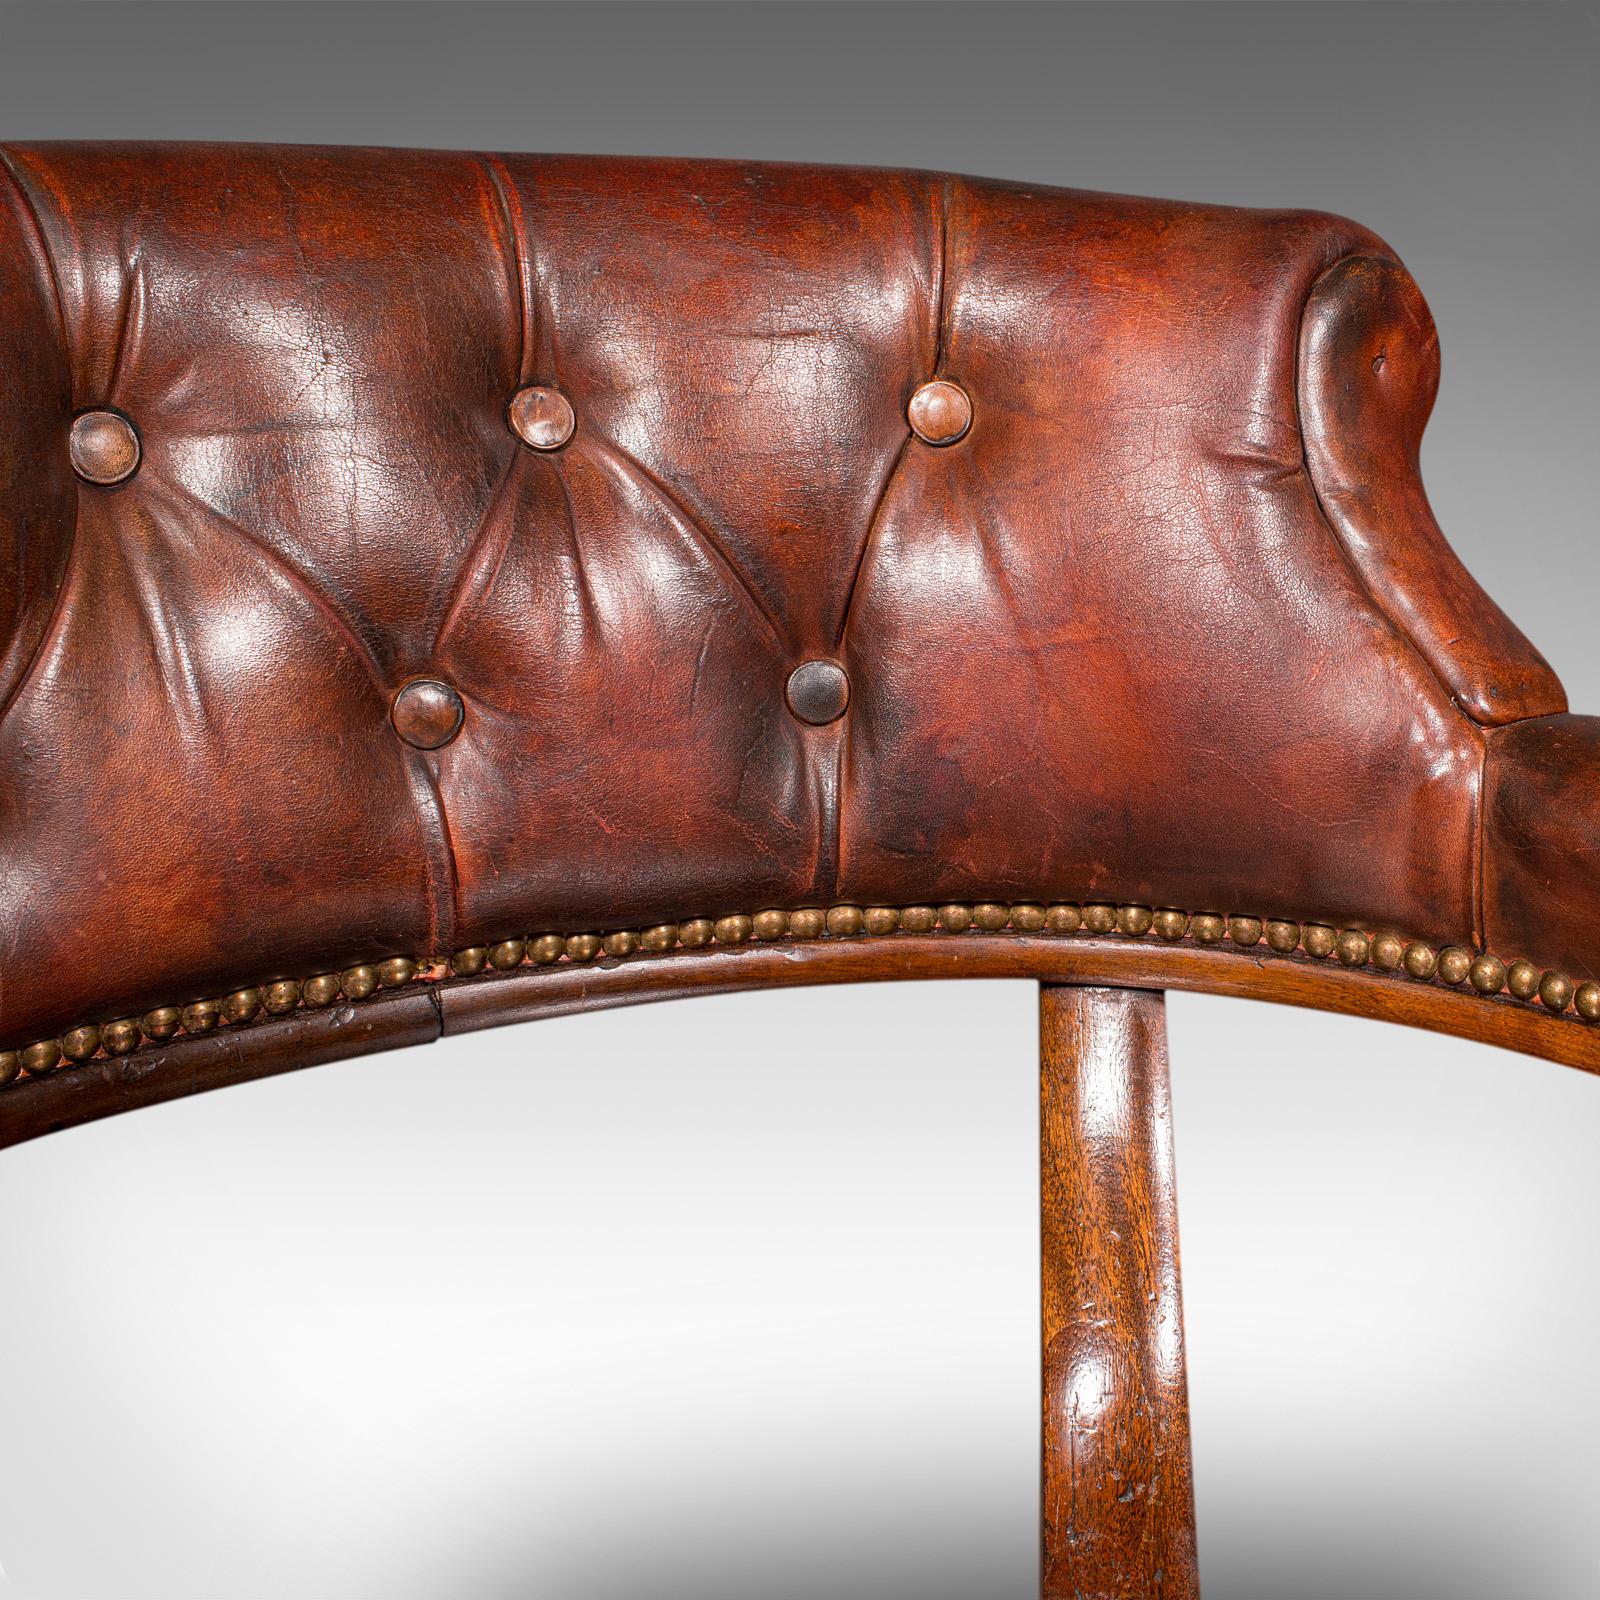 Antique Porter's Hall Chair, English, Leather, Rotary Desk Seat, Victorian, 1880 For Sale 4